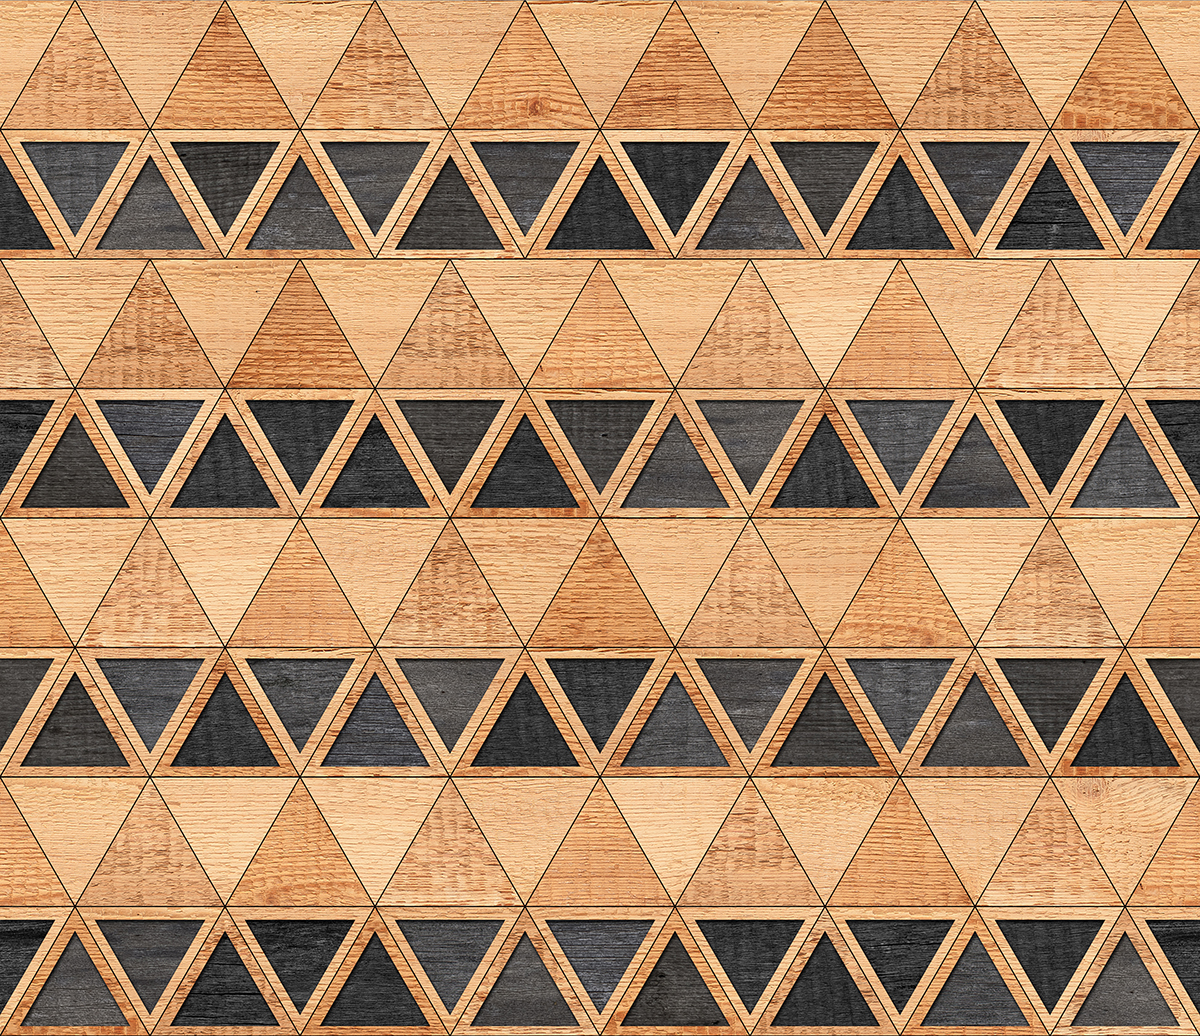 A pattern of triangles on a wood surface